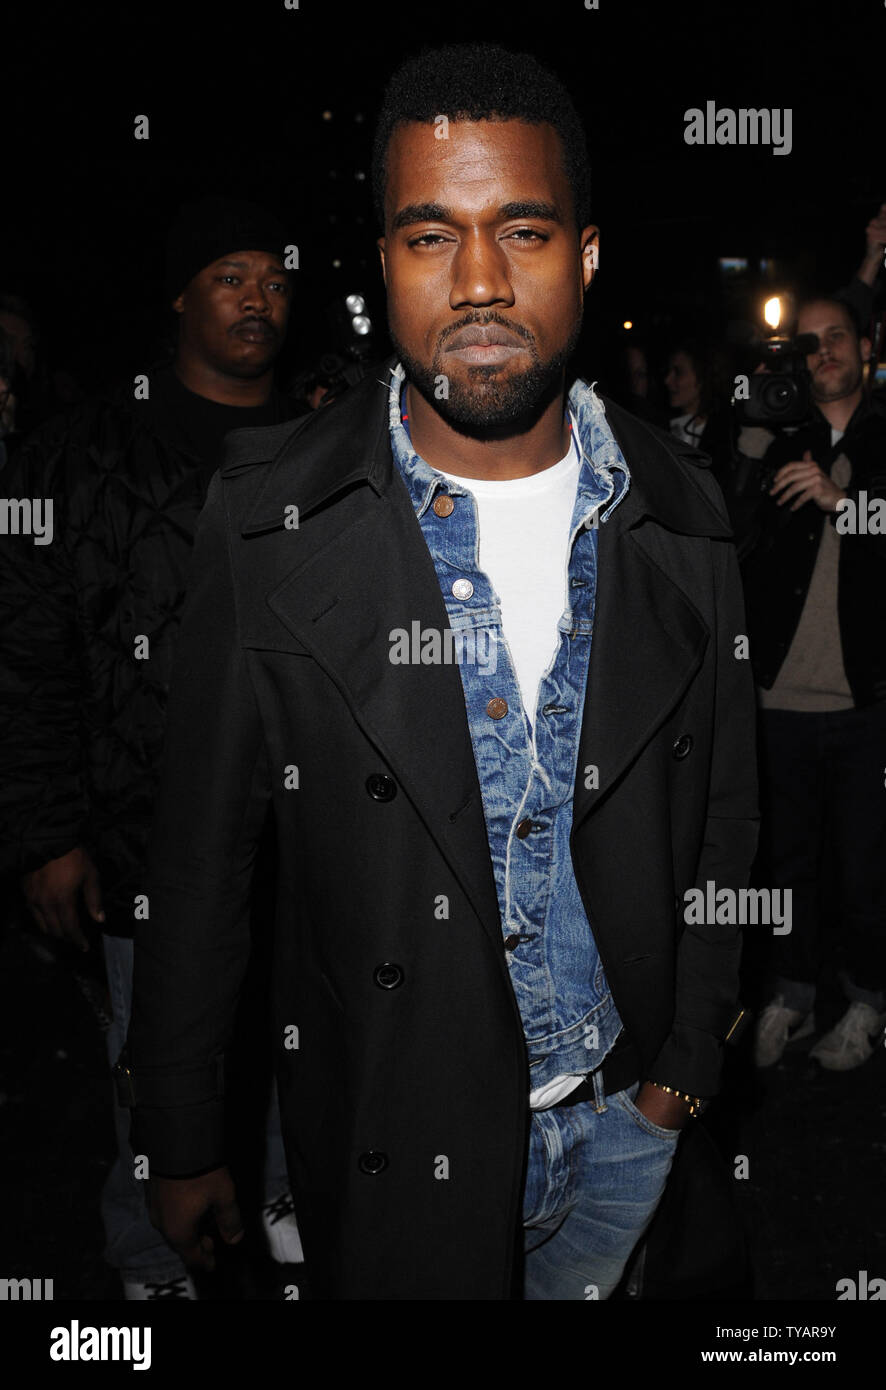 American singer Kanye West attends Vivienne Westwood's Autumn/Winter collection catwalk show at London Fashion Week in London on February 21, 2009.  (UPI Photo/Rune Hellestad) Stock Photo